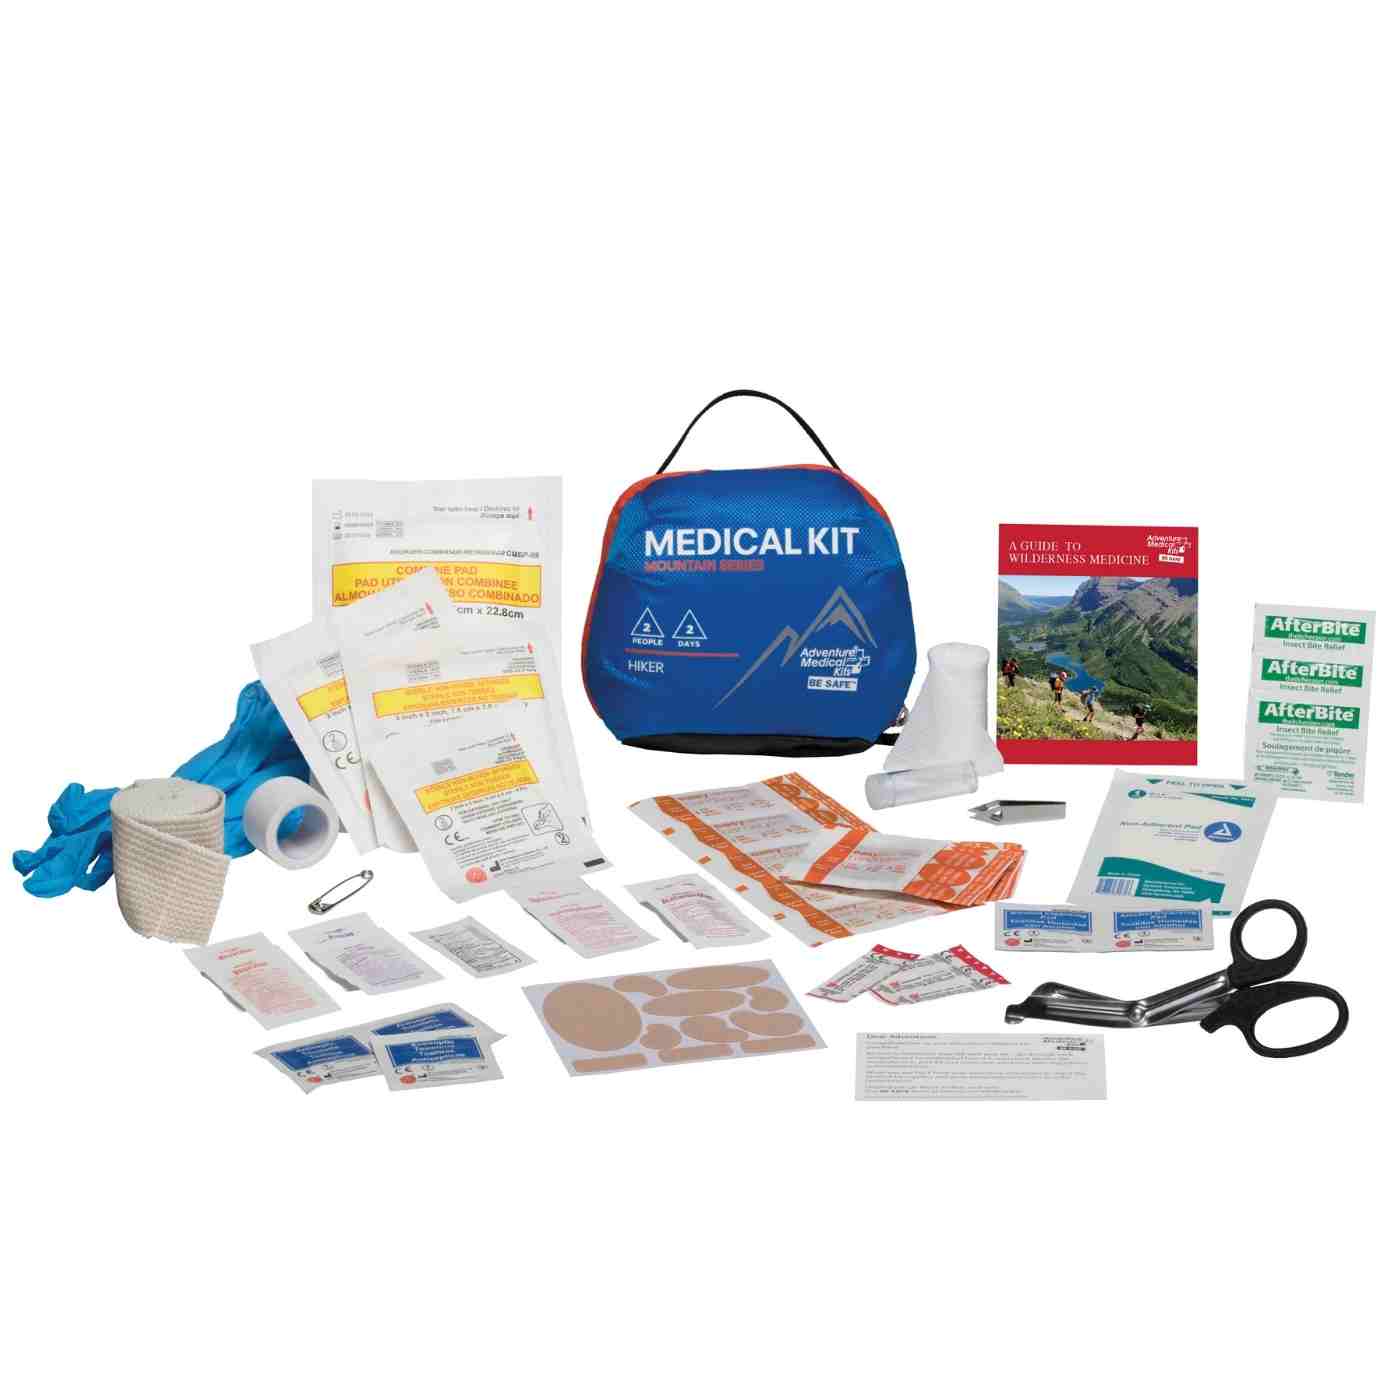 Mountain Series Medical Kit - Hiker contents